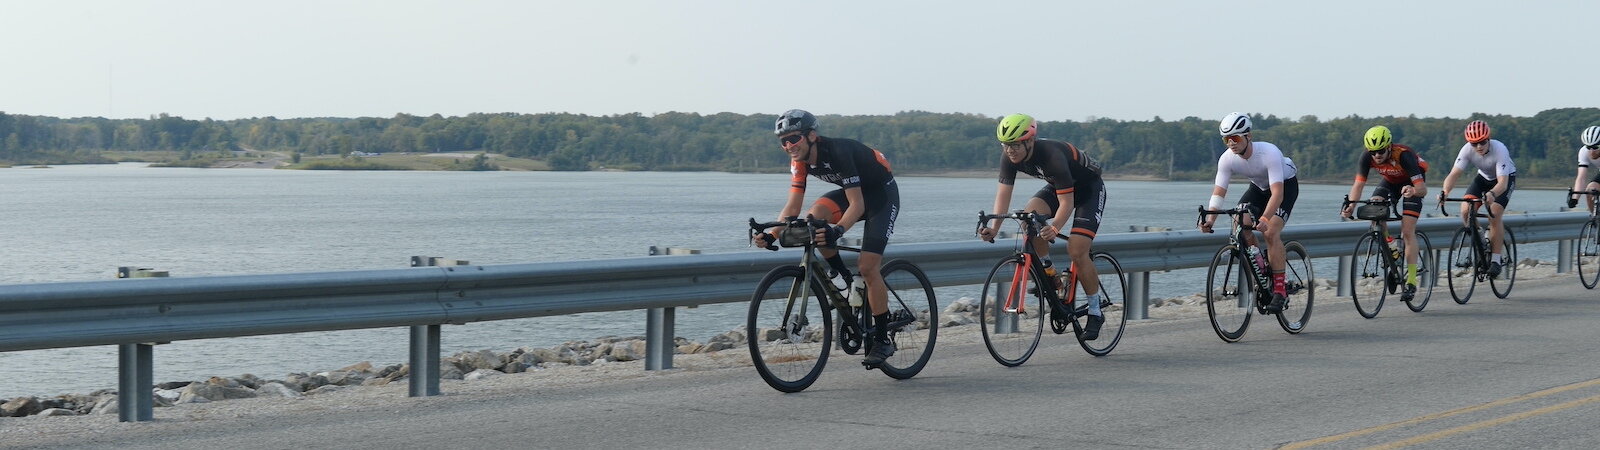 Cyclists compete in the Dam-to-Dam Century Ride in Wabash County.